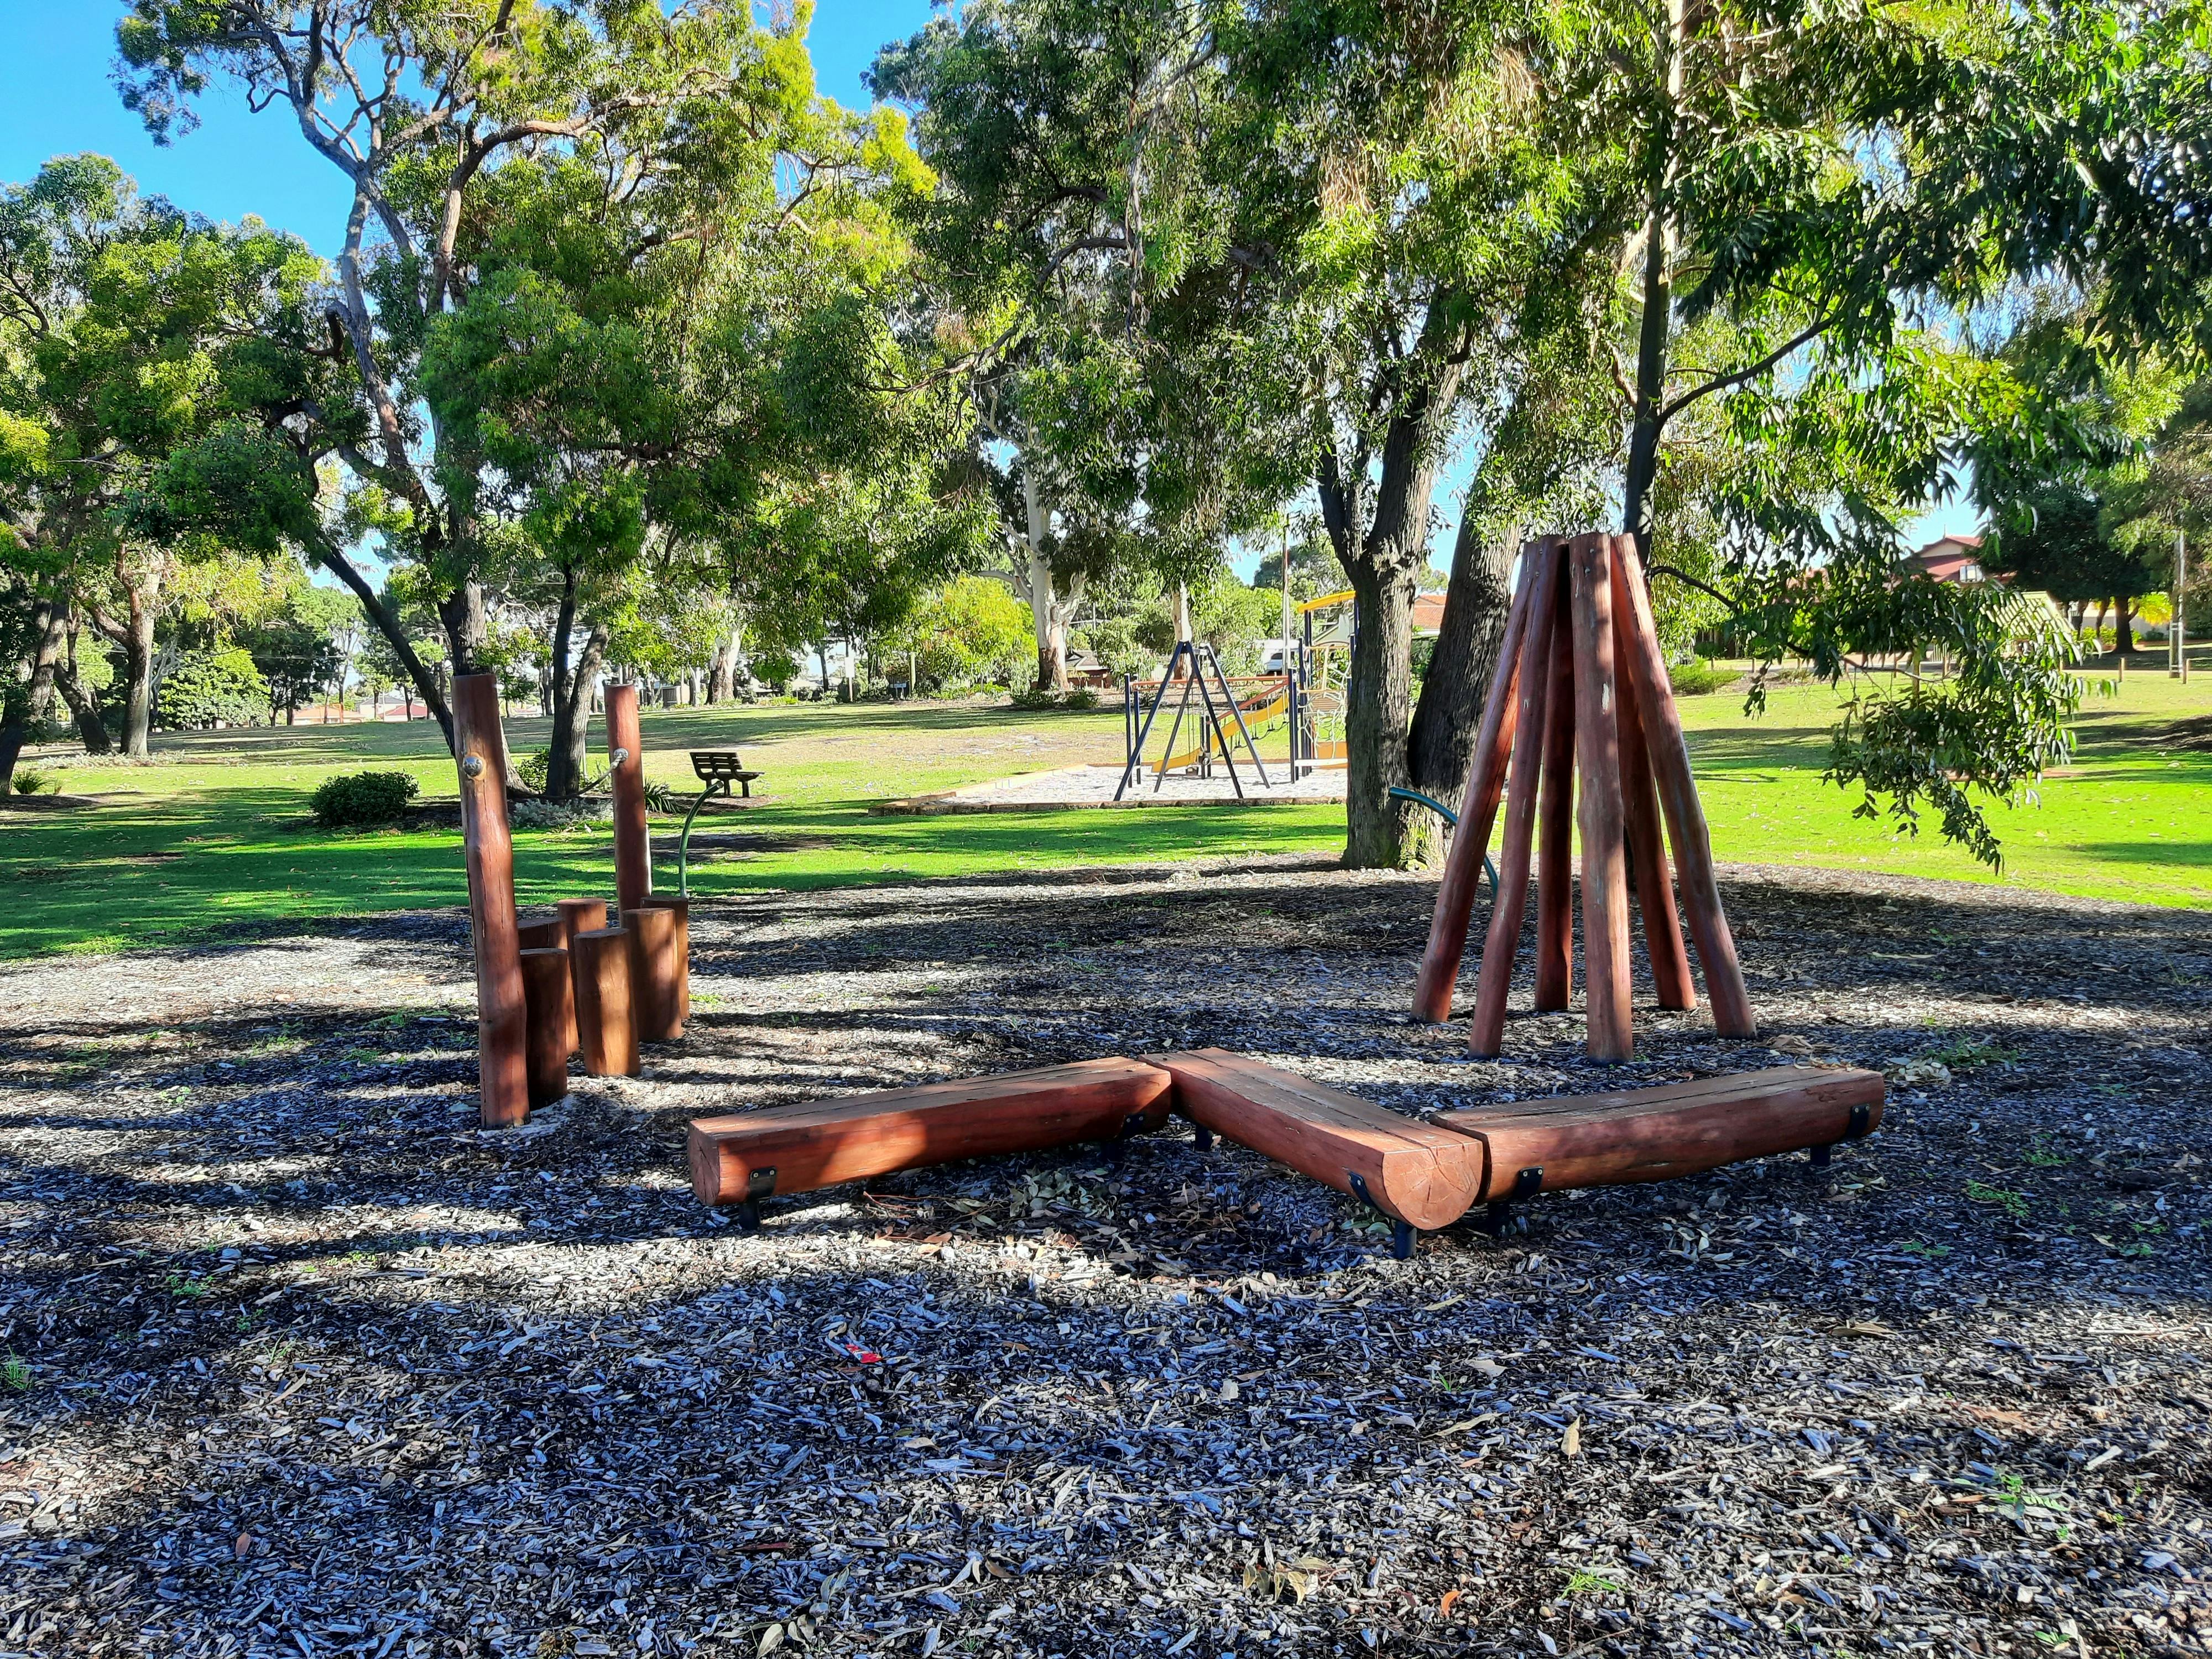 Existing equipment - Nature play space